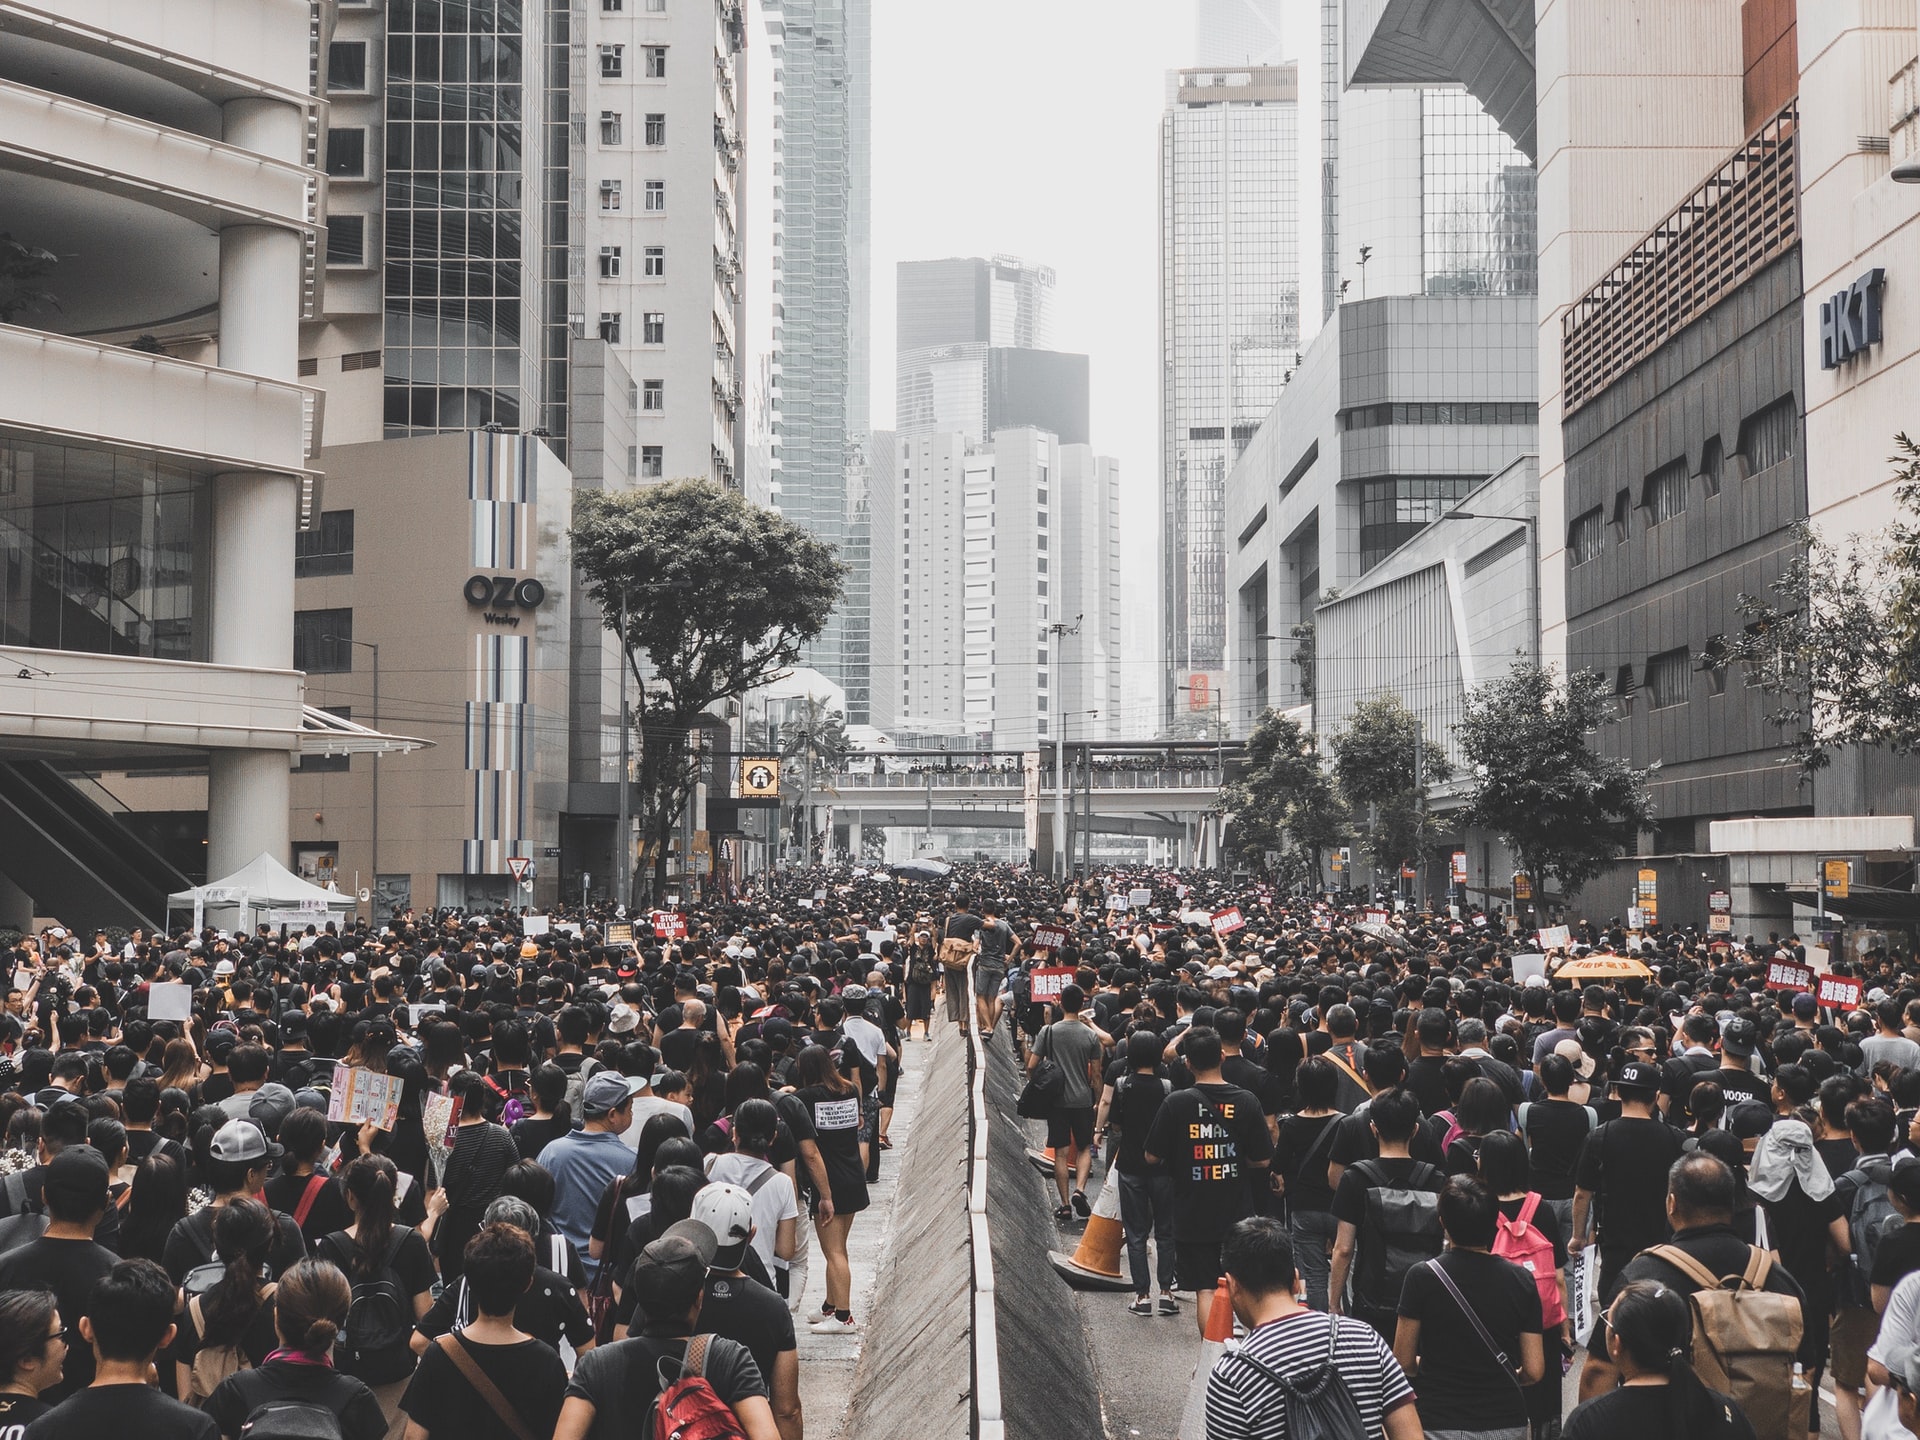 Unrest in Hong Kong has spurred global conversation about China's democracy movement. Expert panelists will discuss in a virtual session on July 29 from 2-4 p.m. EDT.